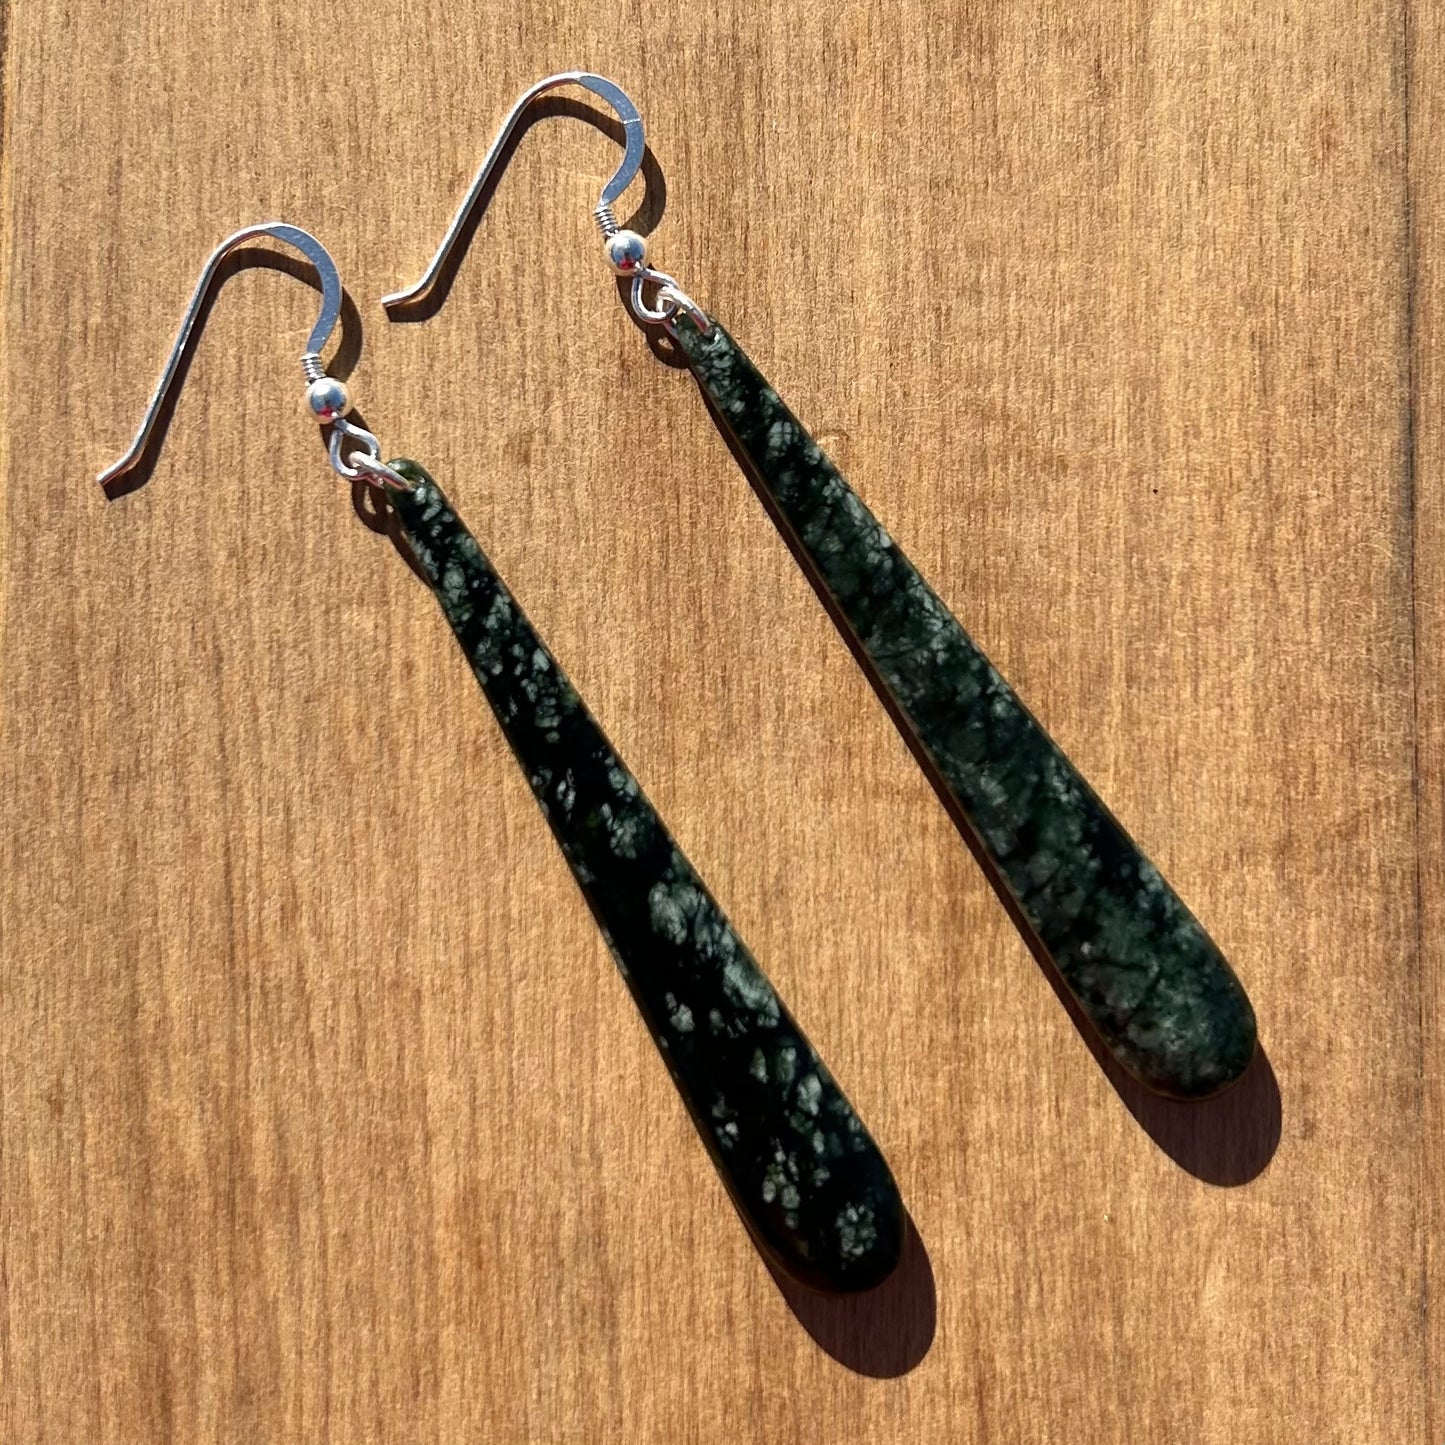 Pair of roimata (teardrop) earrings hand-carved from New Zealand tangiwai pounamu (greenstone), with sterling silver fittings. Back.